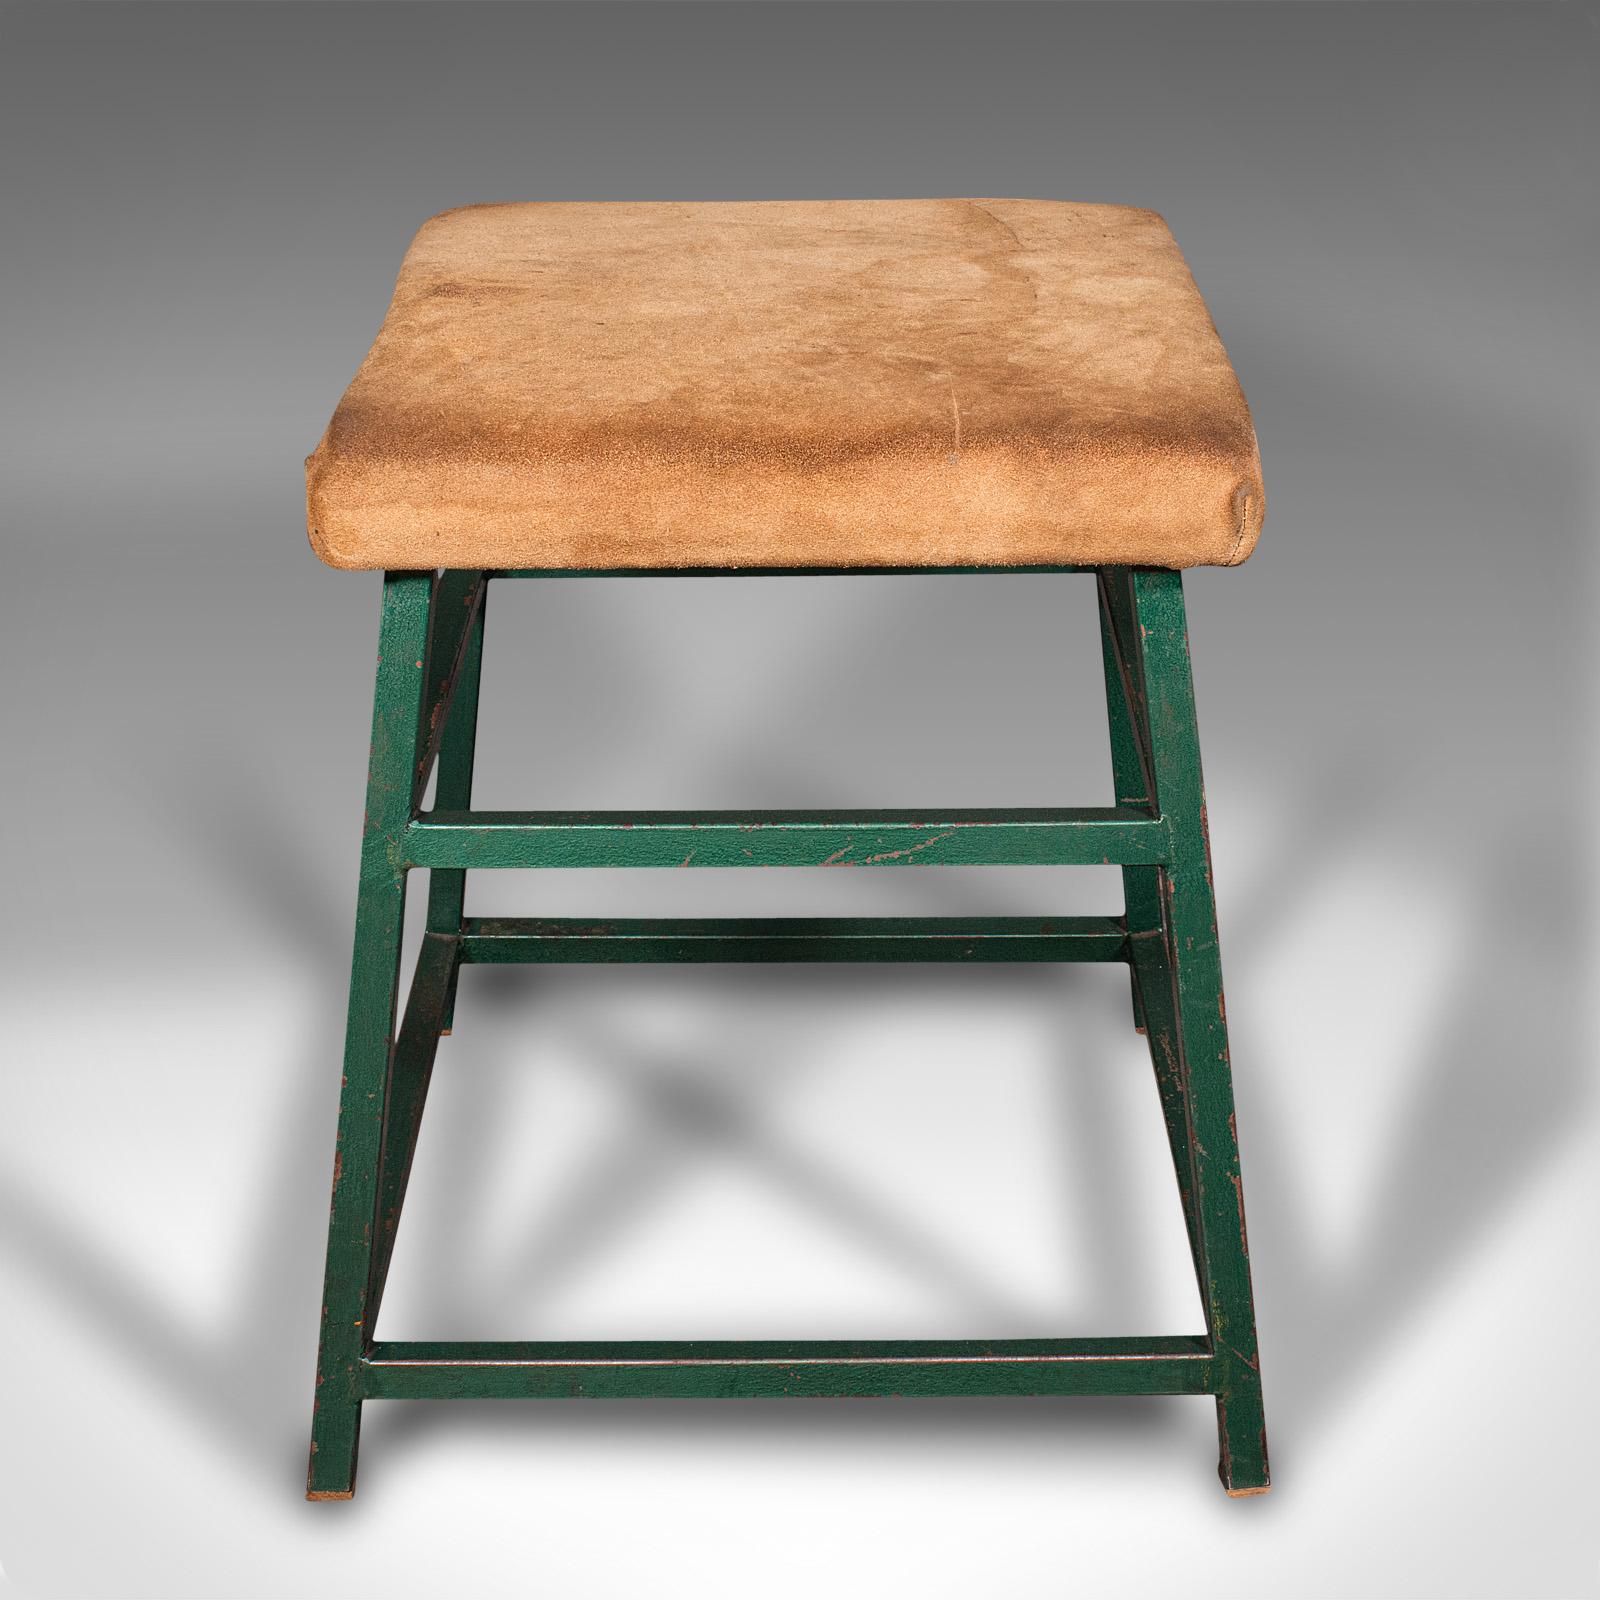 British Large Vintage Industrial Lab Stool, English, Suede, Kitchen, Office Seat, C.1950 For Sale